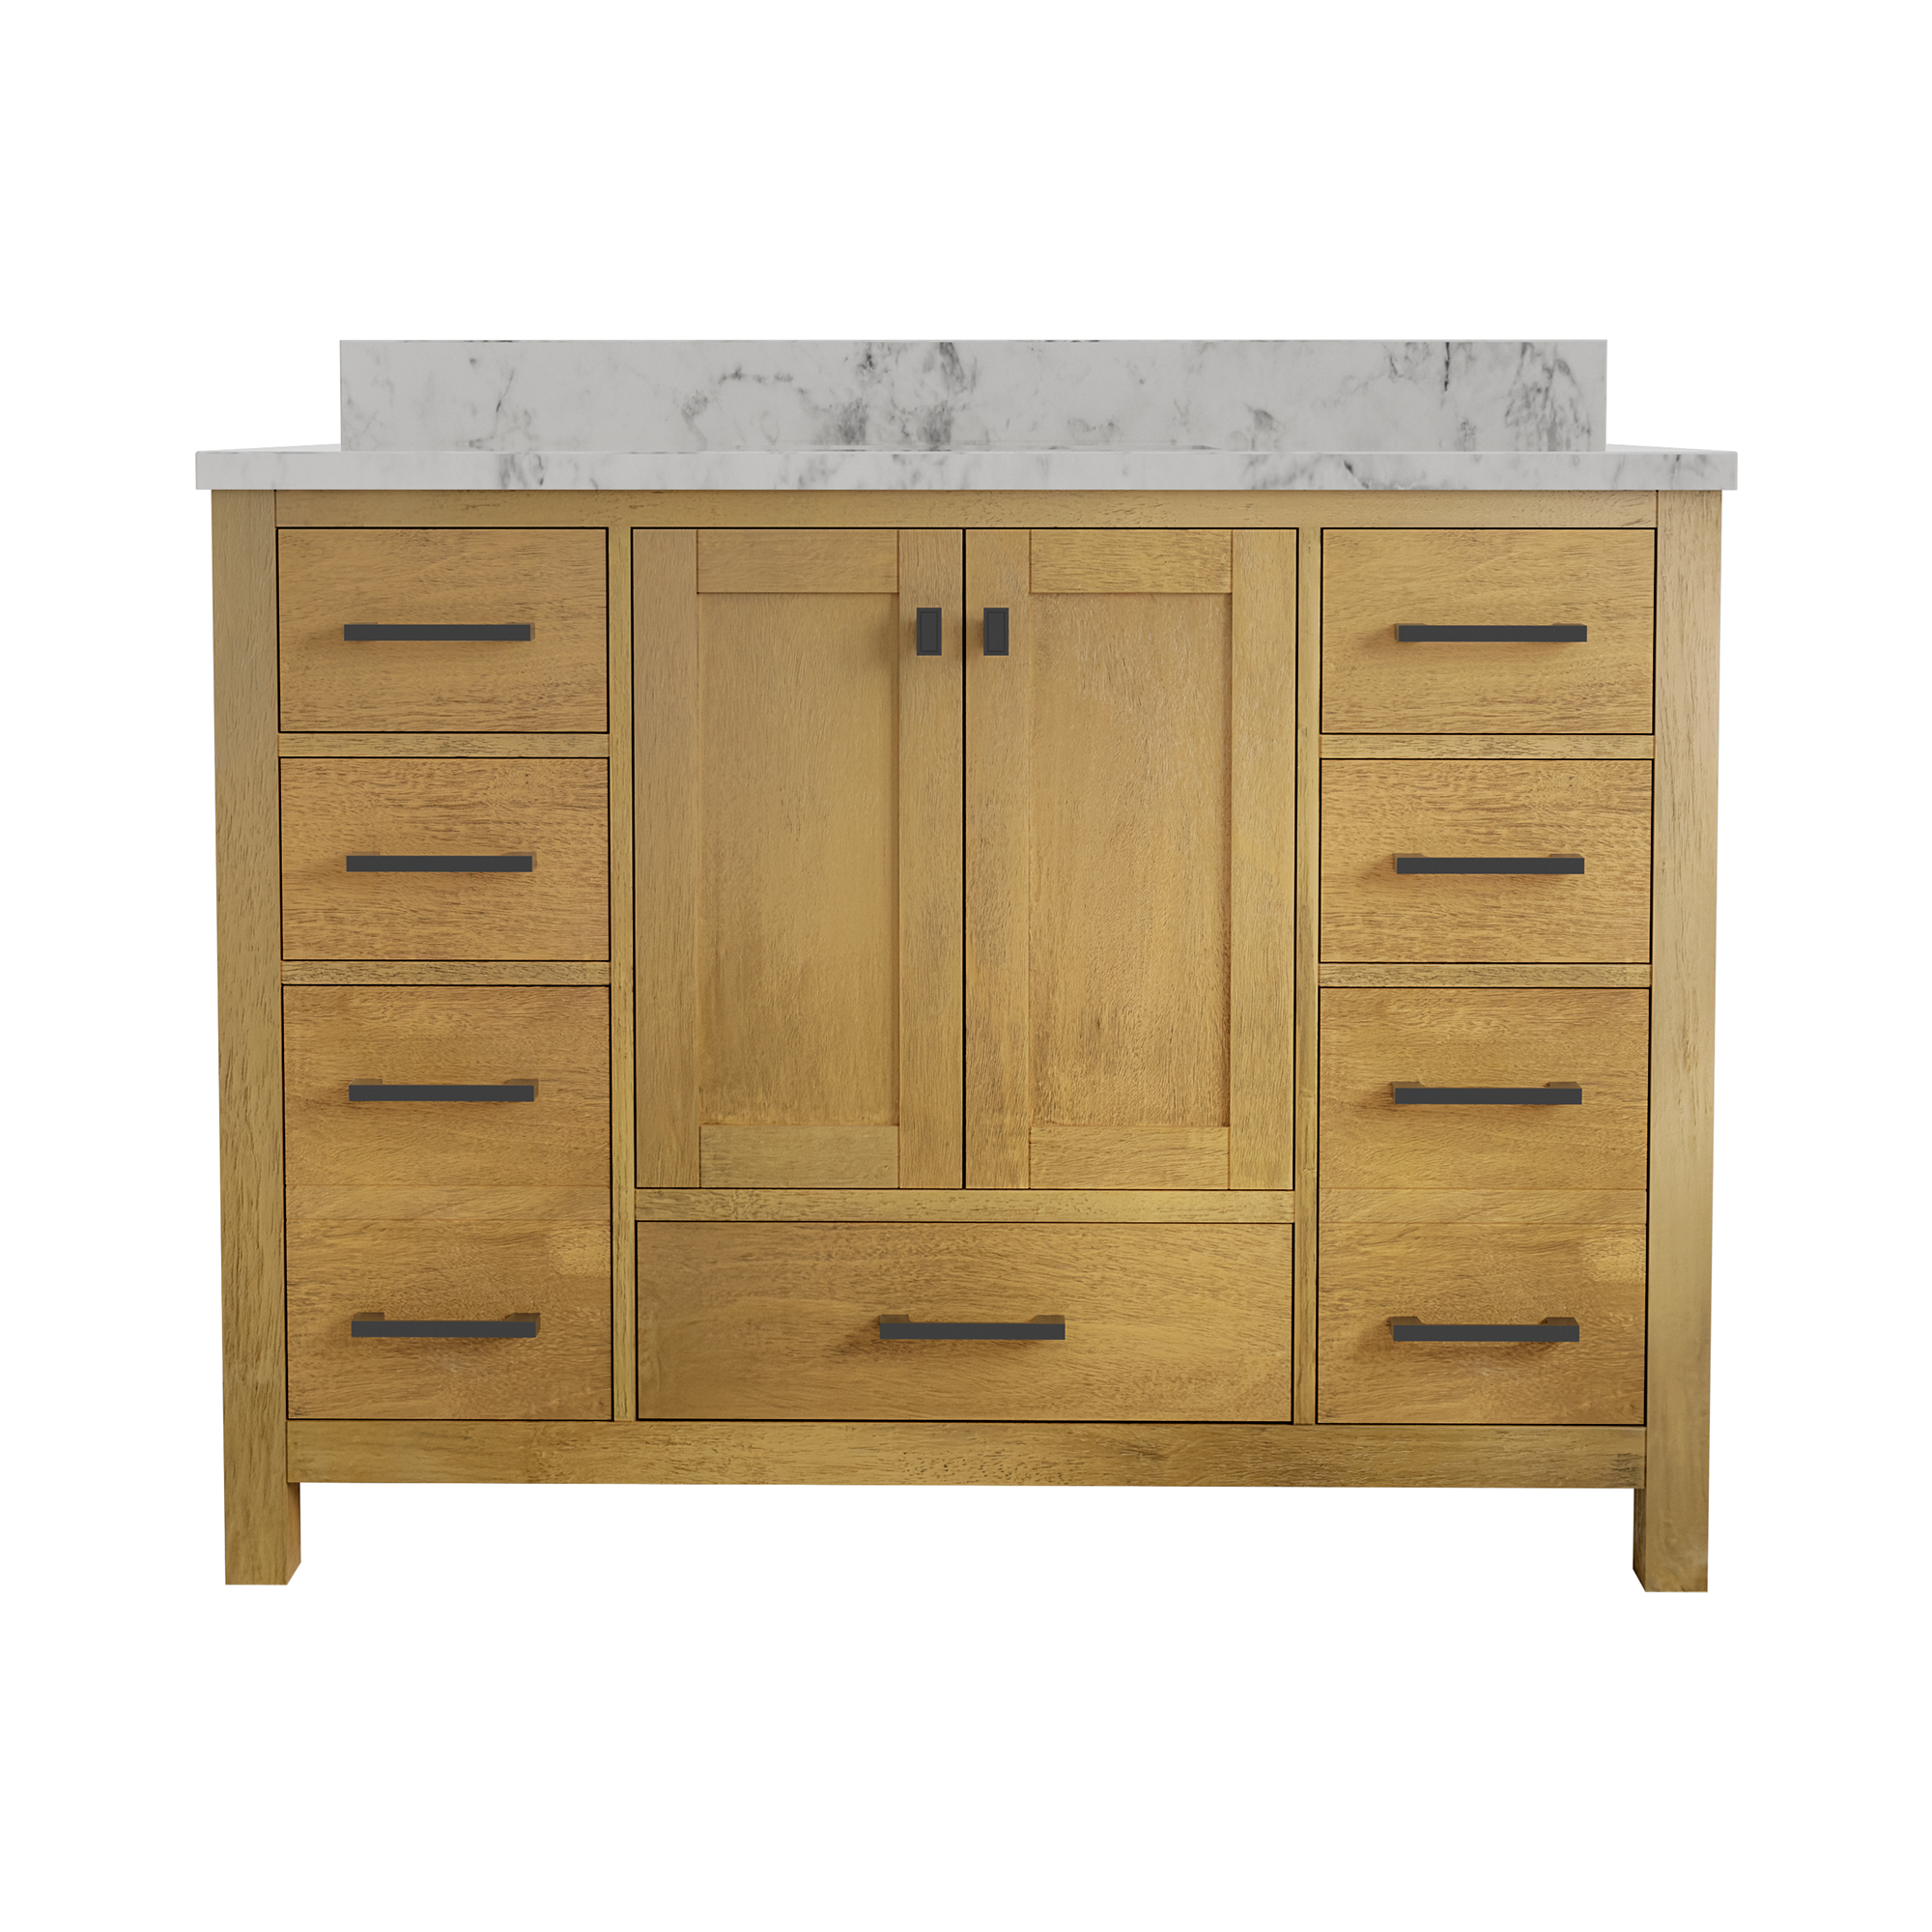 36"/48"/60" Solid Wood Bathroom Vanity with Italian Carrara White Marble Countertop and Ceramic Basin in Almond Toffee